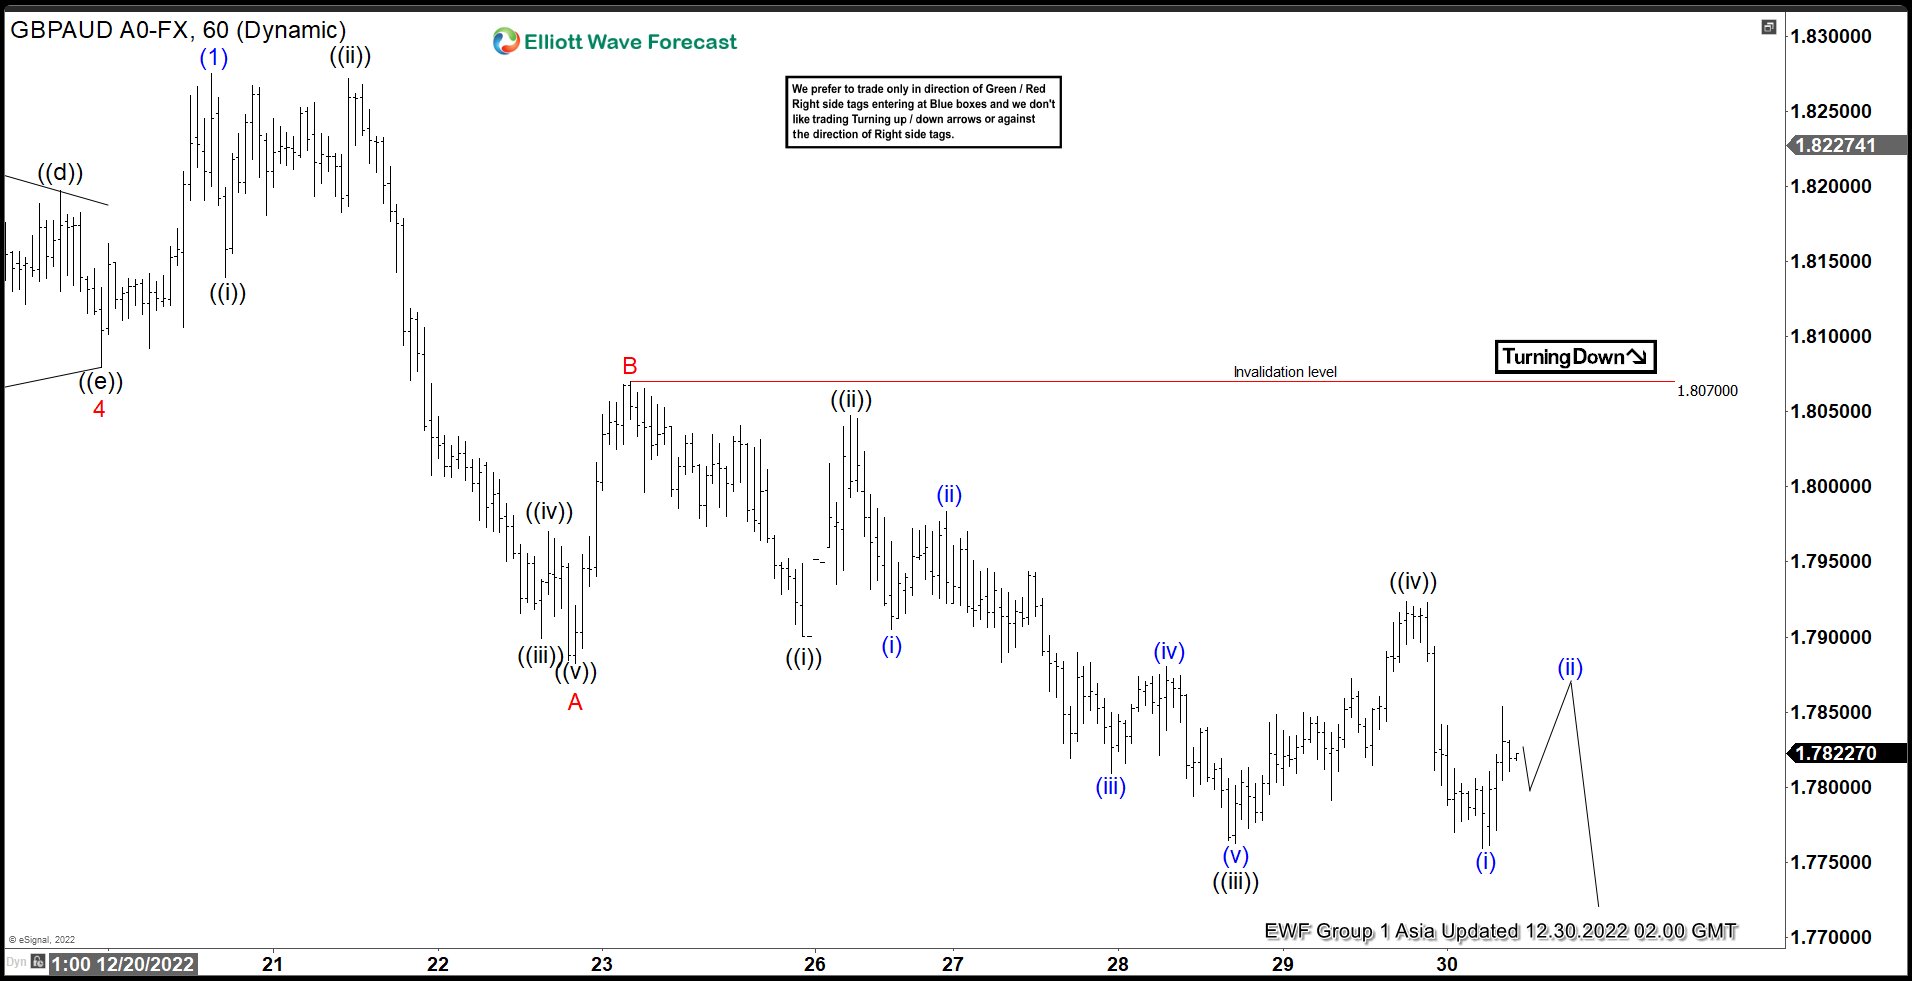 GBPAUD Should Soon Find Support According to Elliott Wave